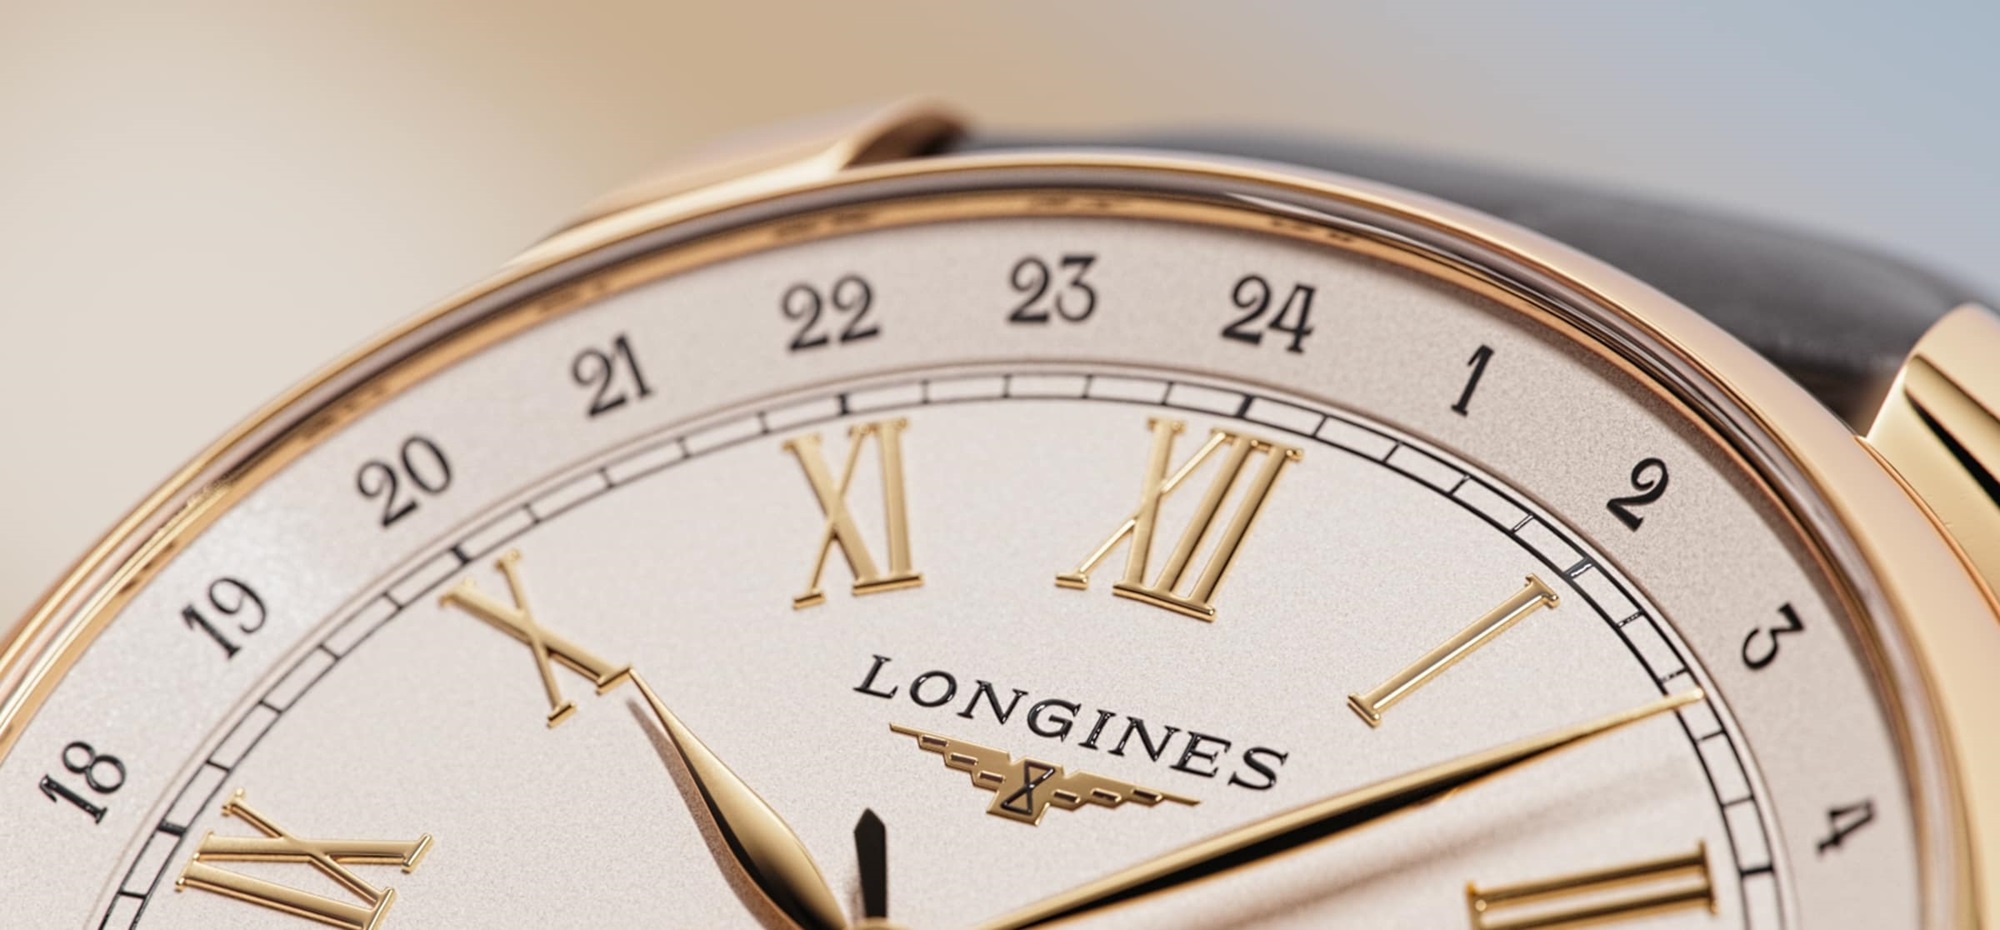 Longines Master Collection GMT Yellow gold face